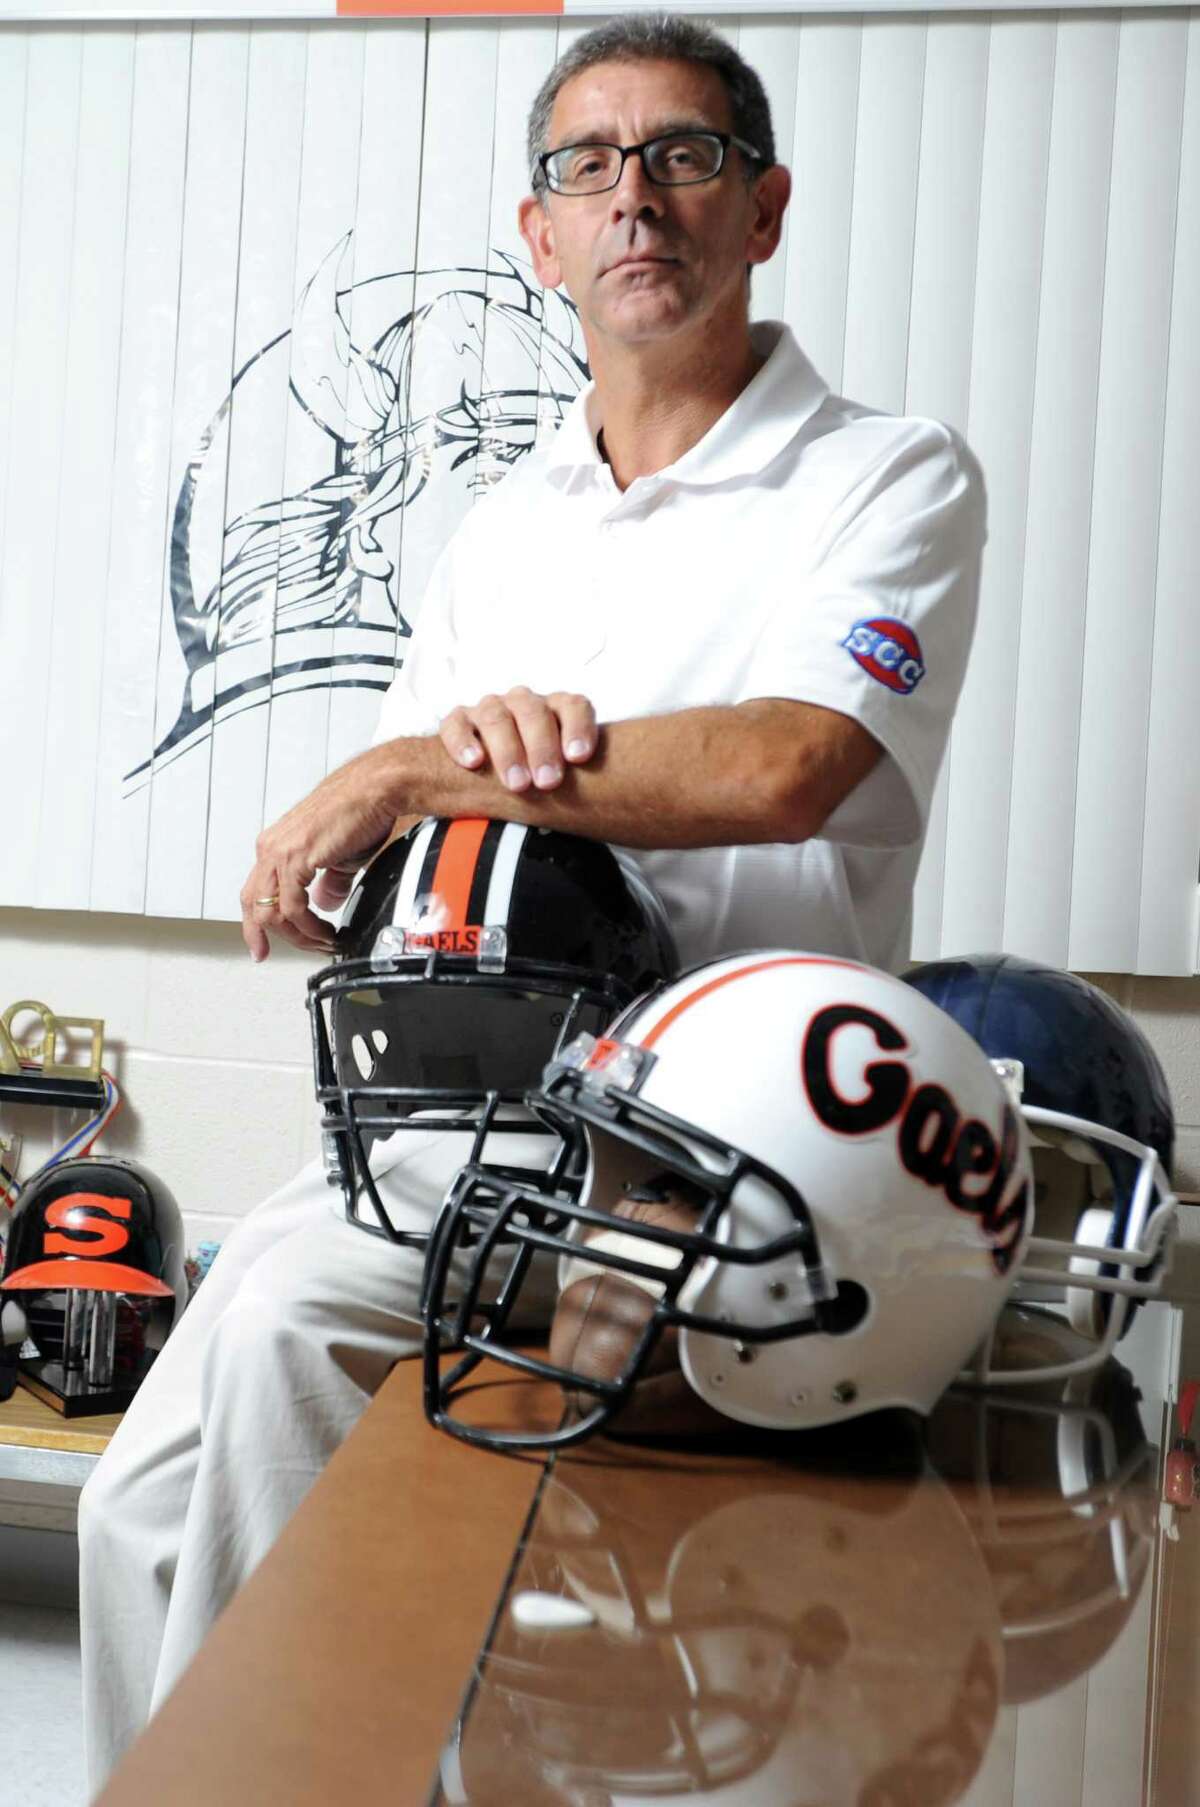 Shelton High School athletic director John Niski poses for a photograph in his office at the school in Shelton, Conn.